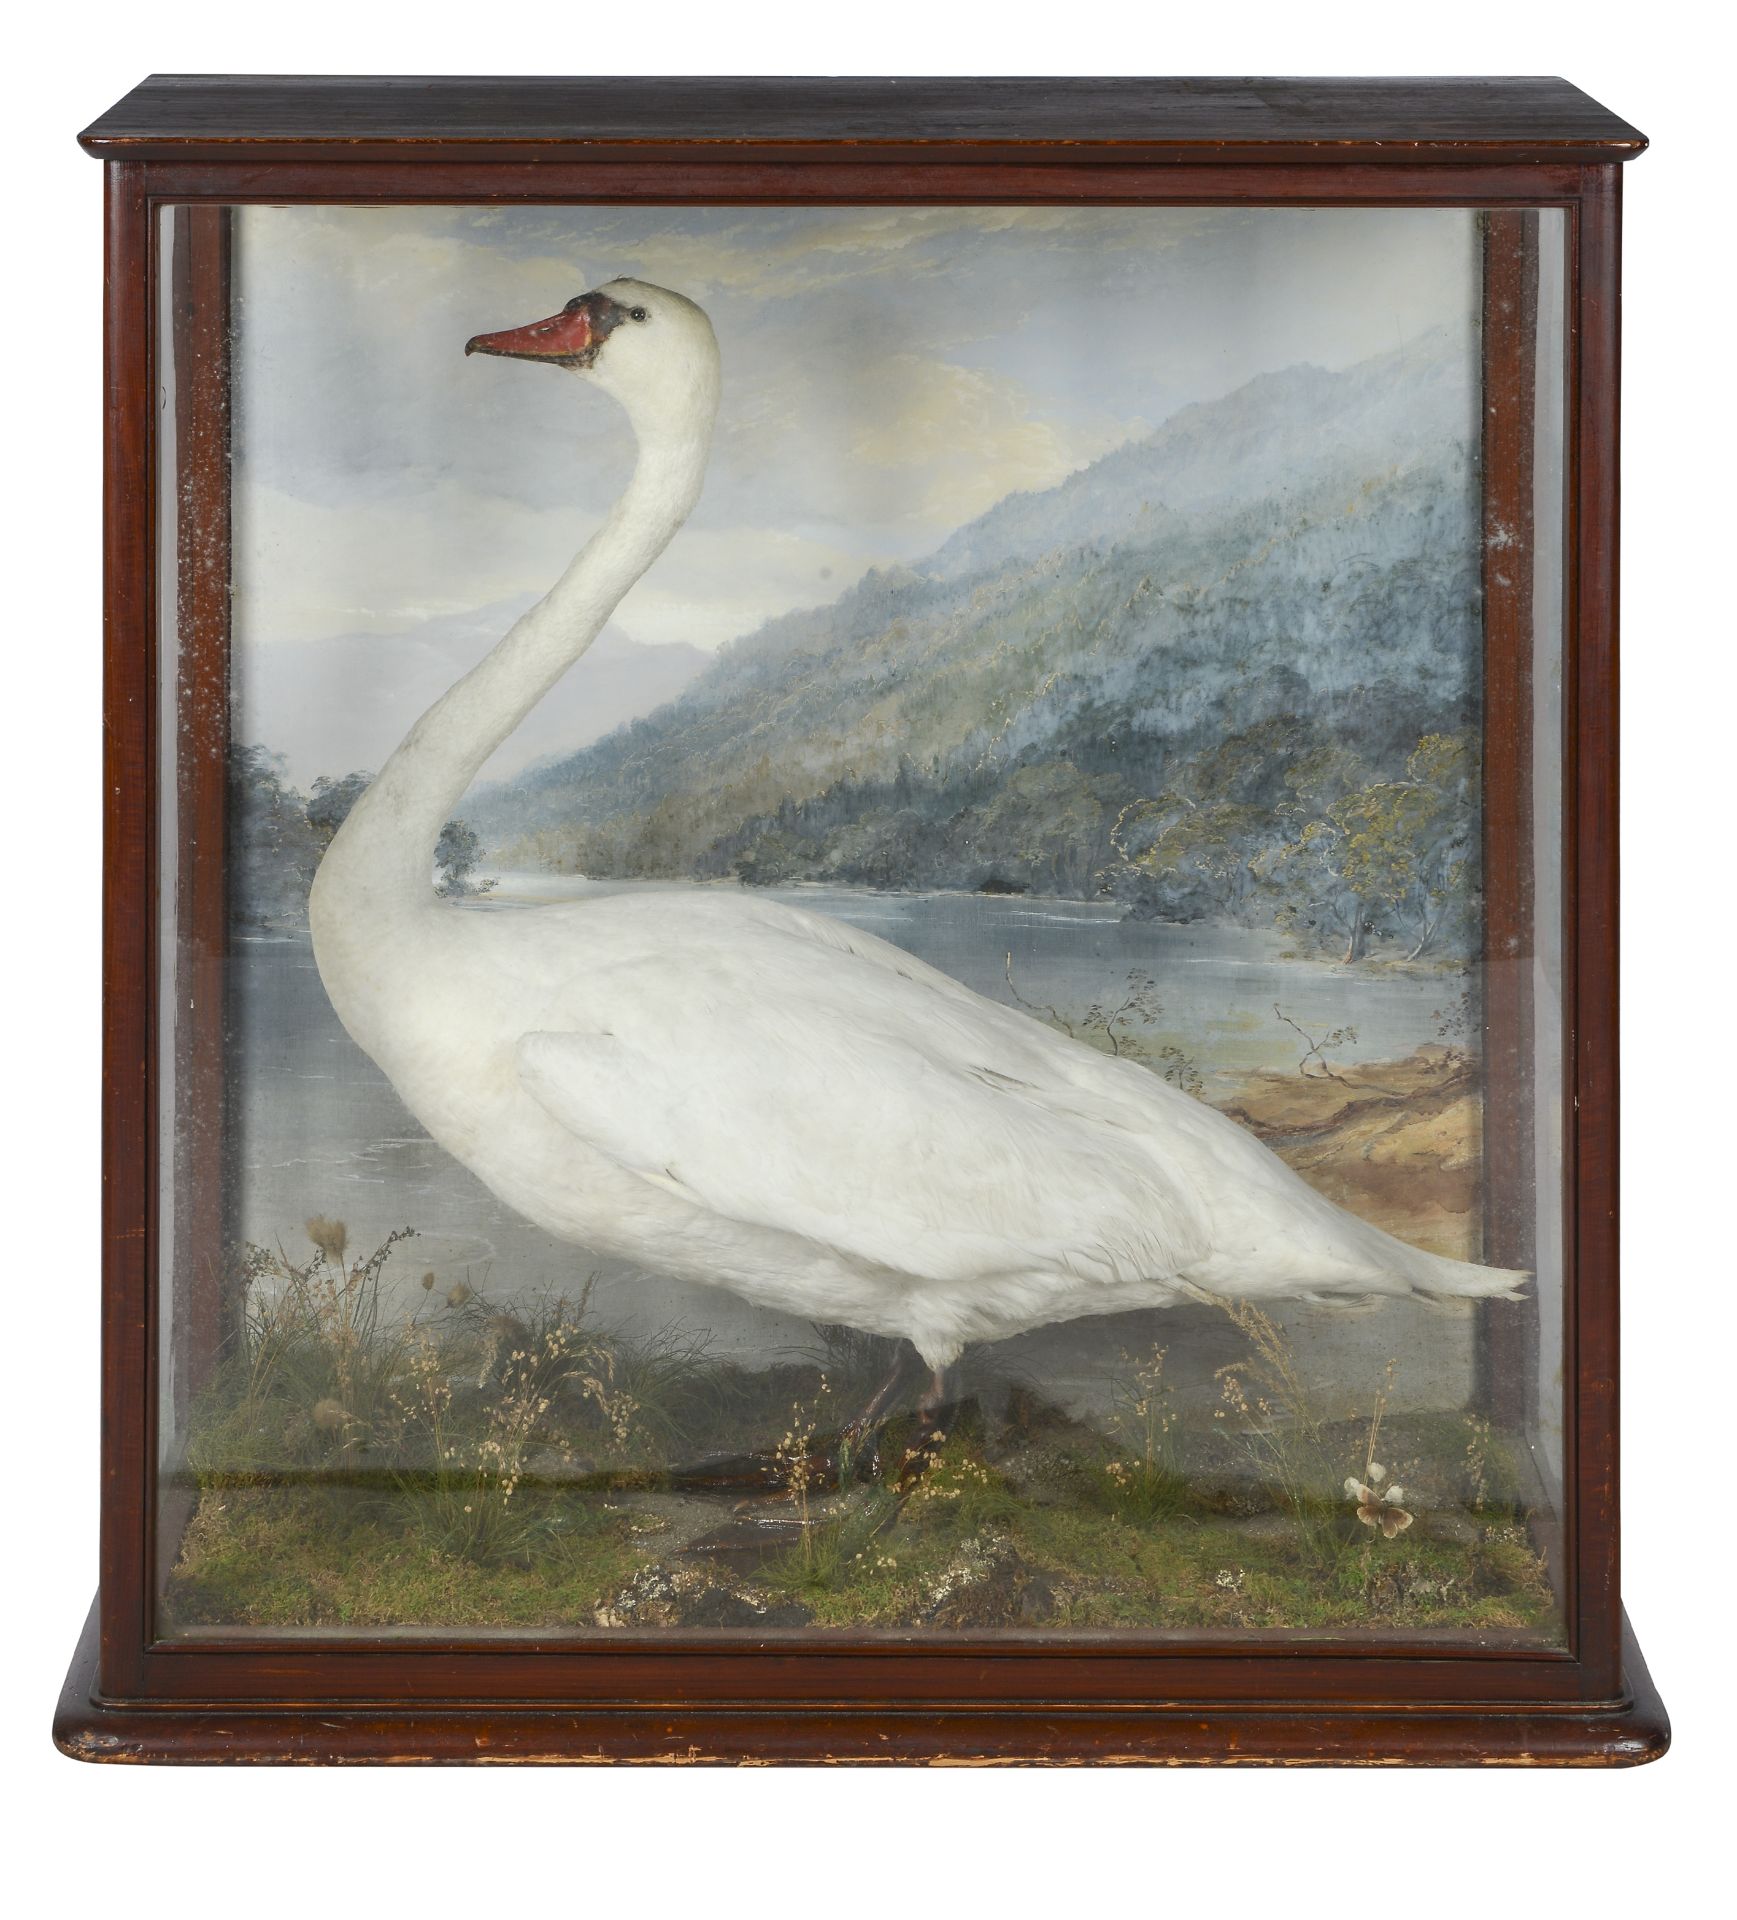 Of Taymouth Castle Interest: A Victorian taxidermy specimen of a Swan